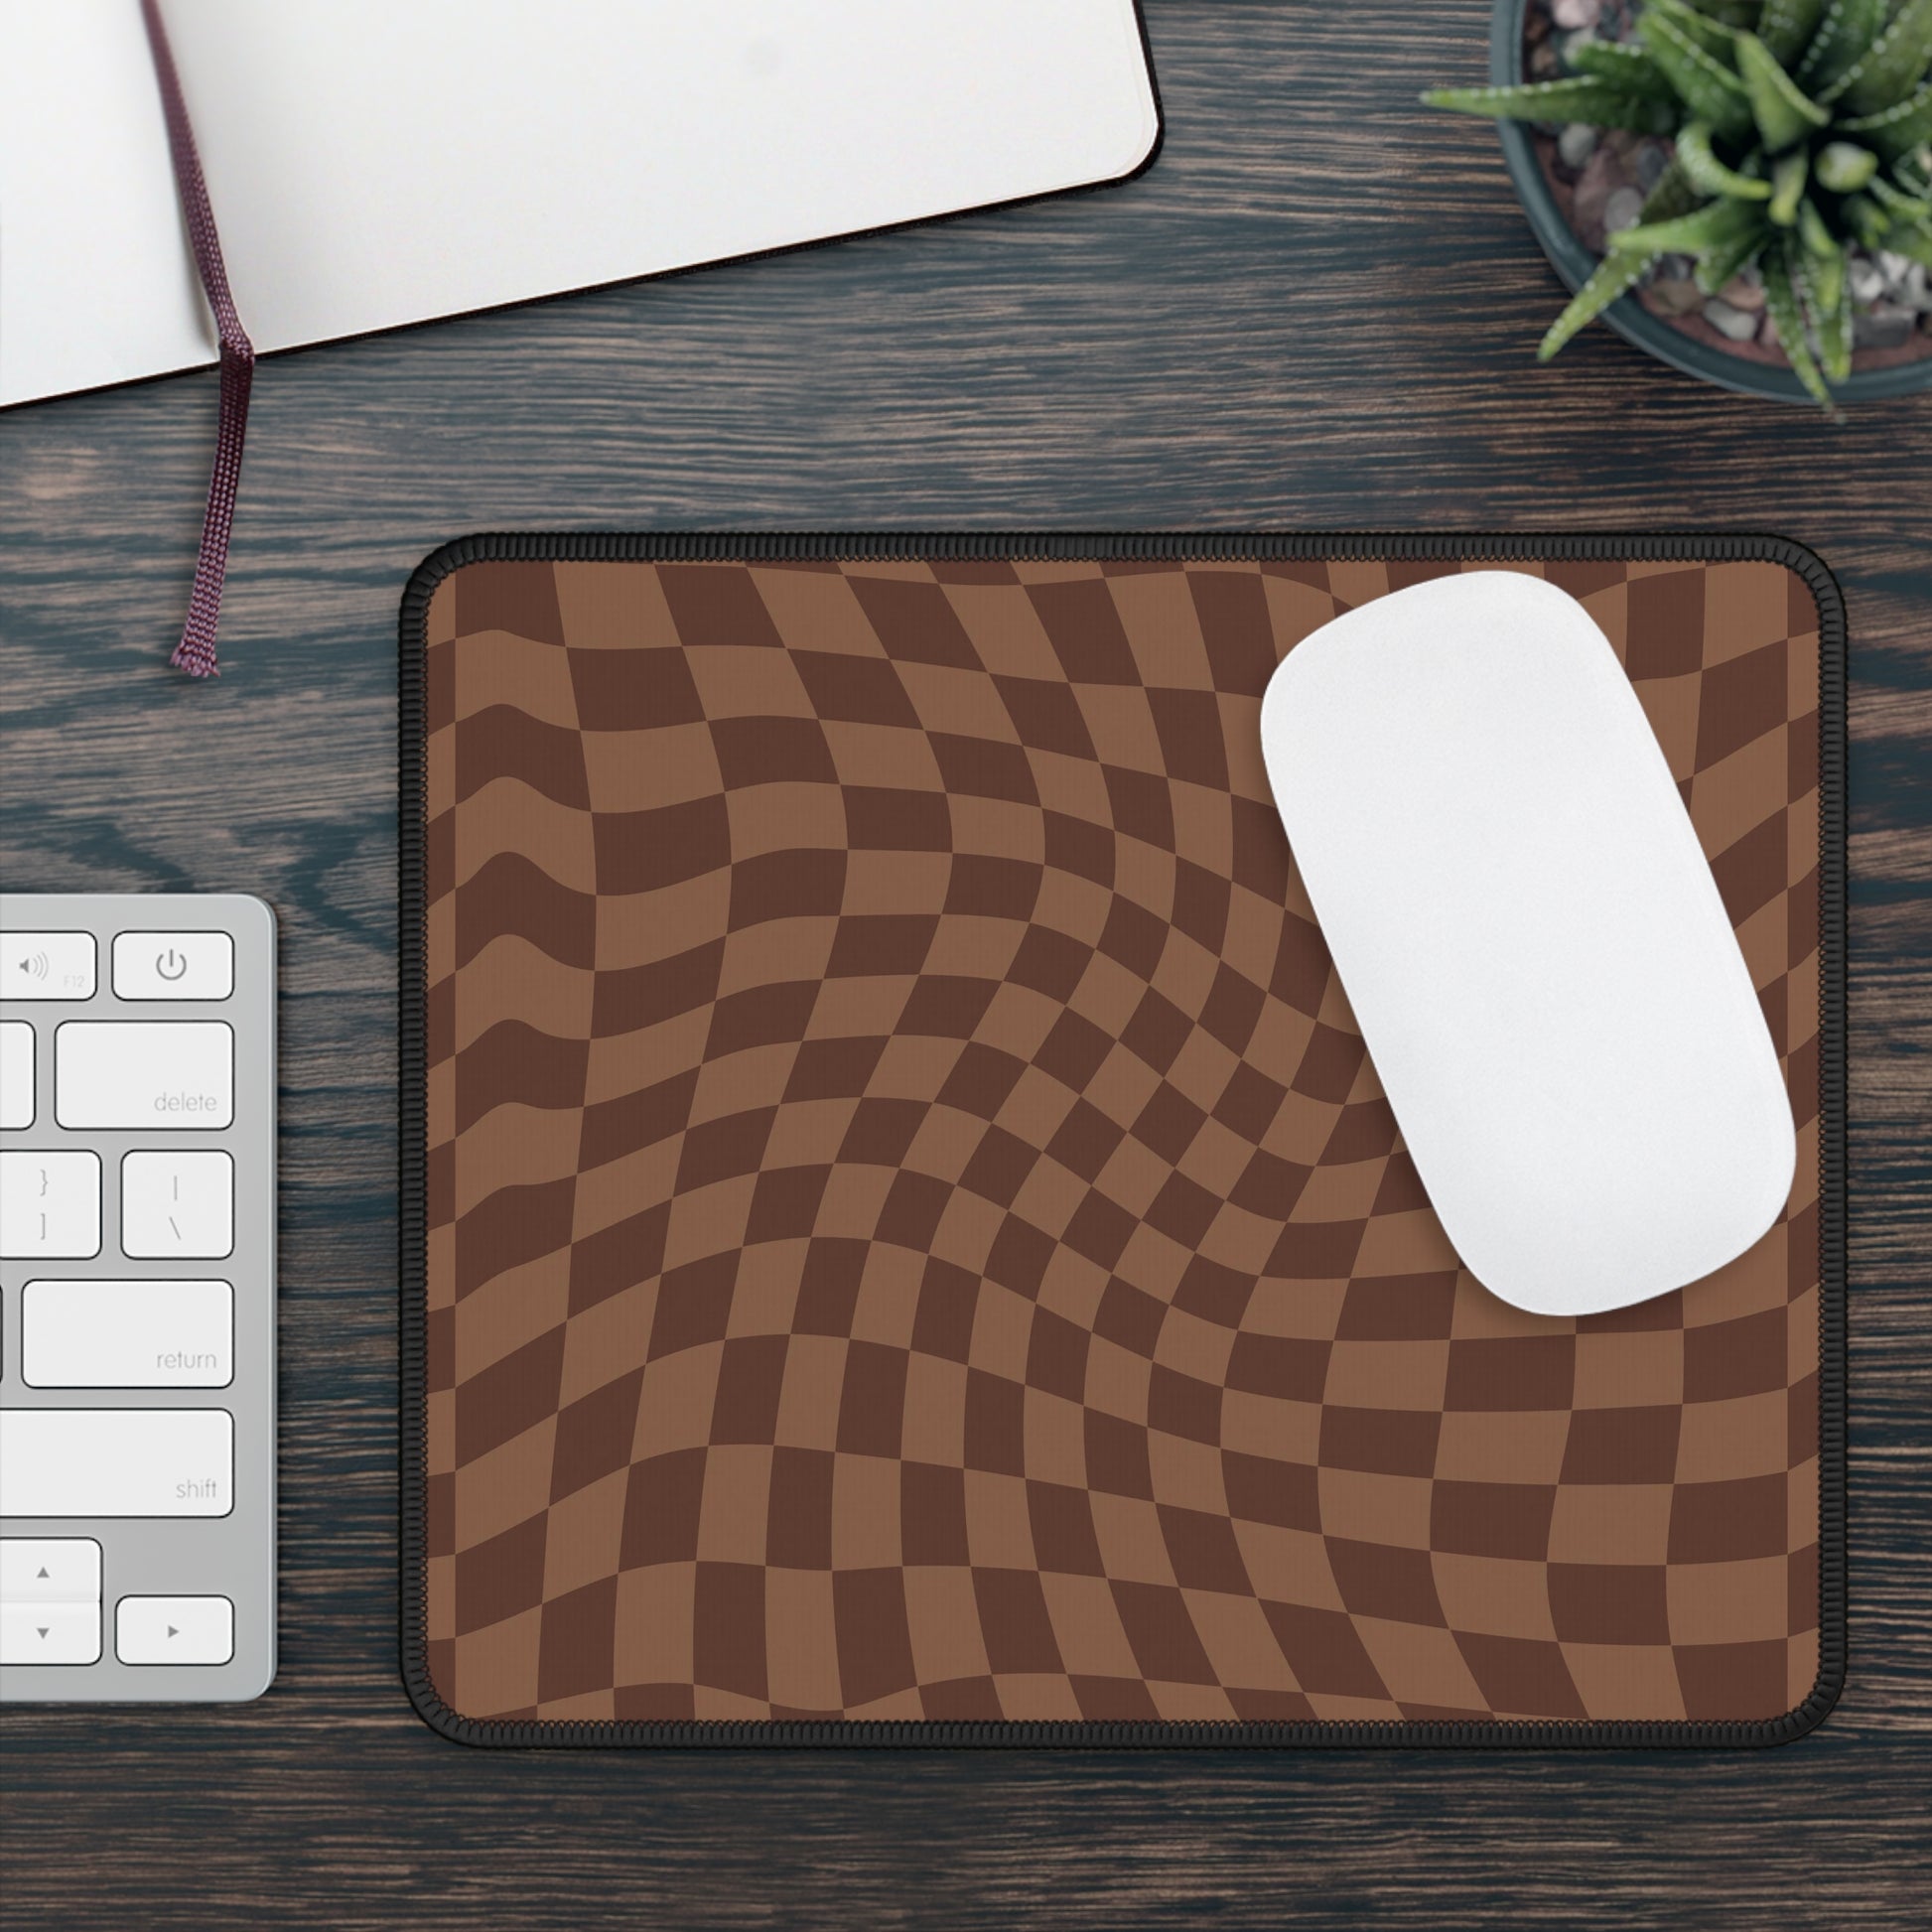 Brown Wavy Checkerboard Non Slip Gaming or Desk Mouse Pad 9 x 7